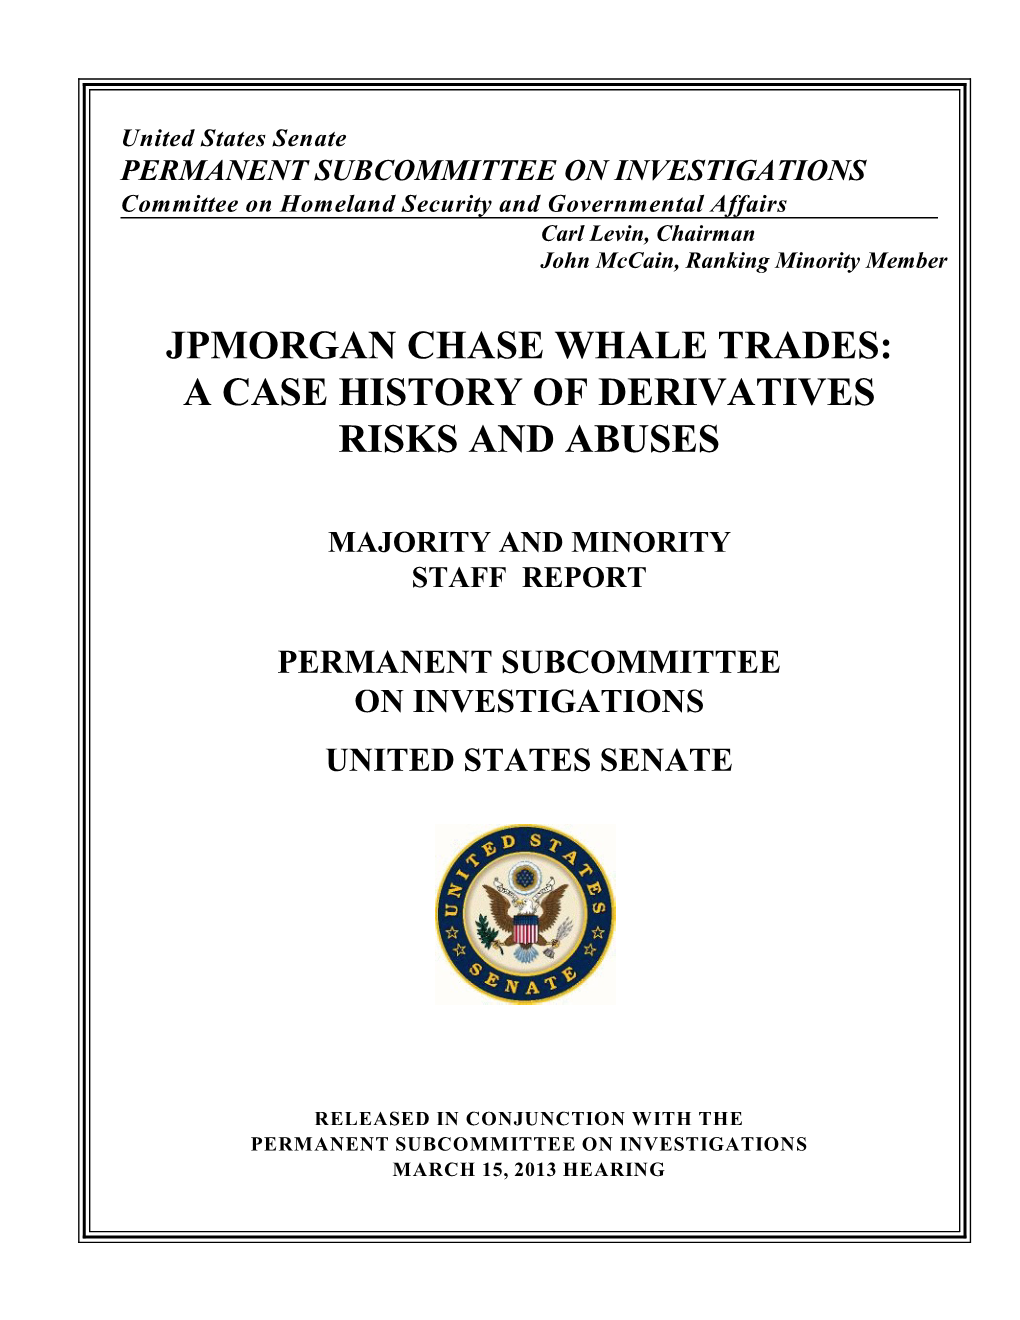 Jpmorgan Chase Whale Trades: a Case History of Derivatives Risks and Abuses